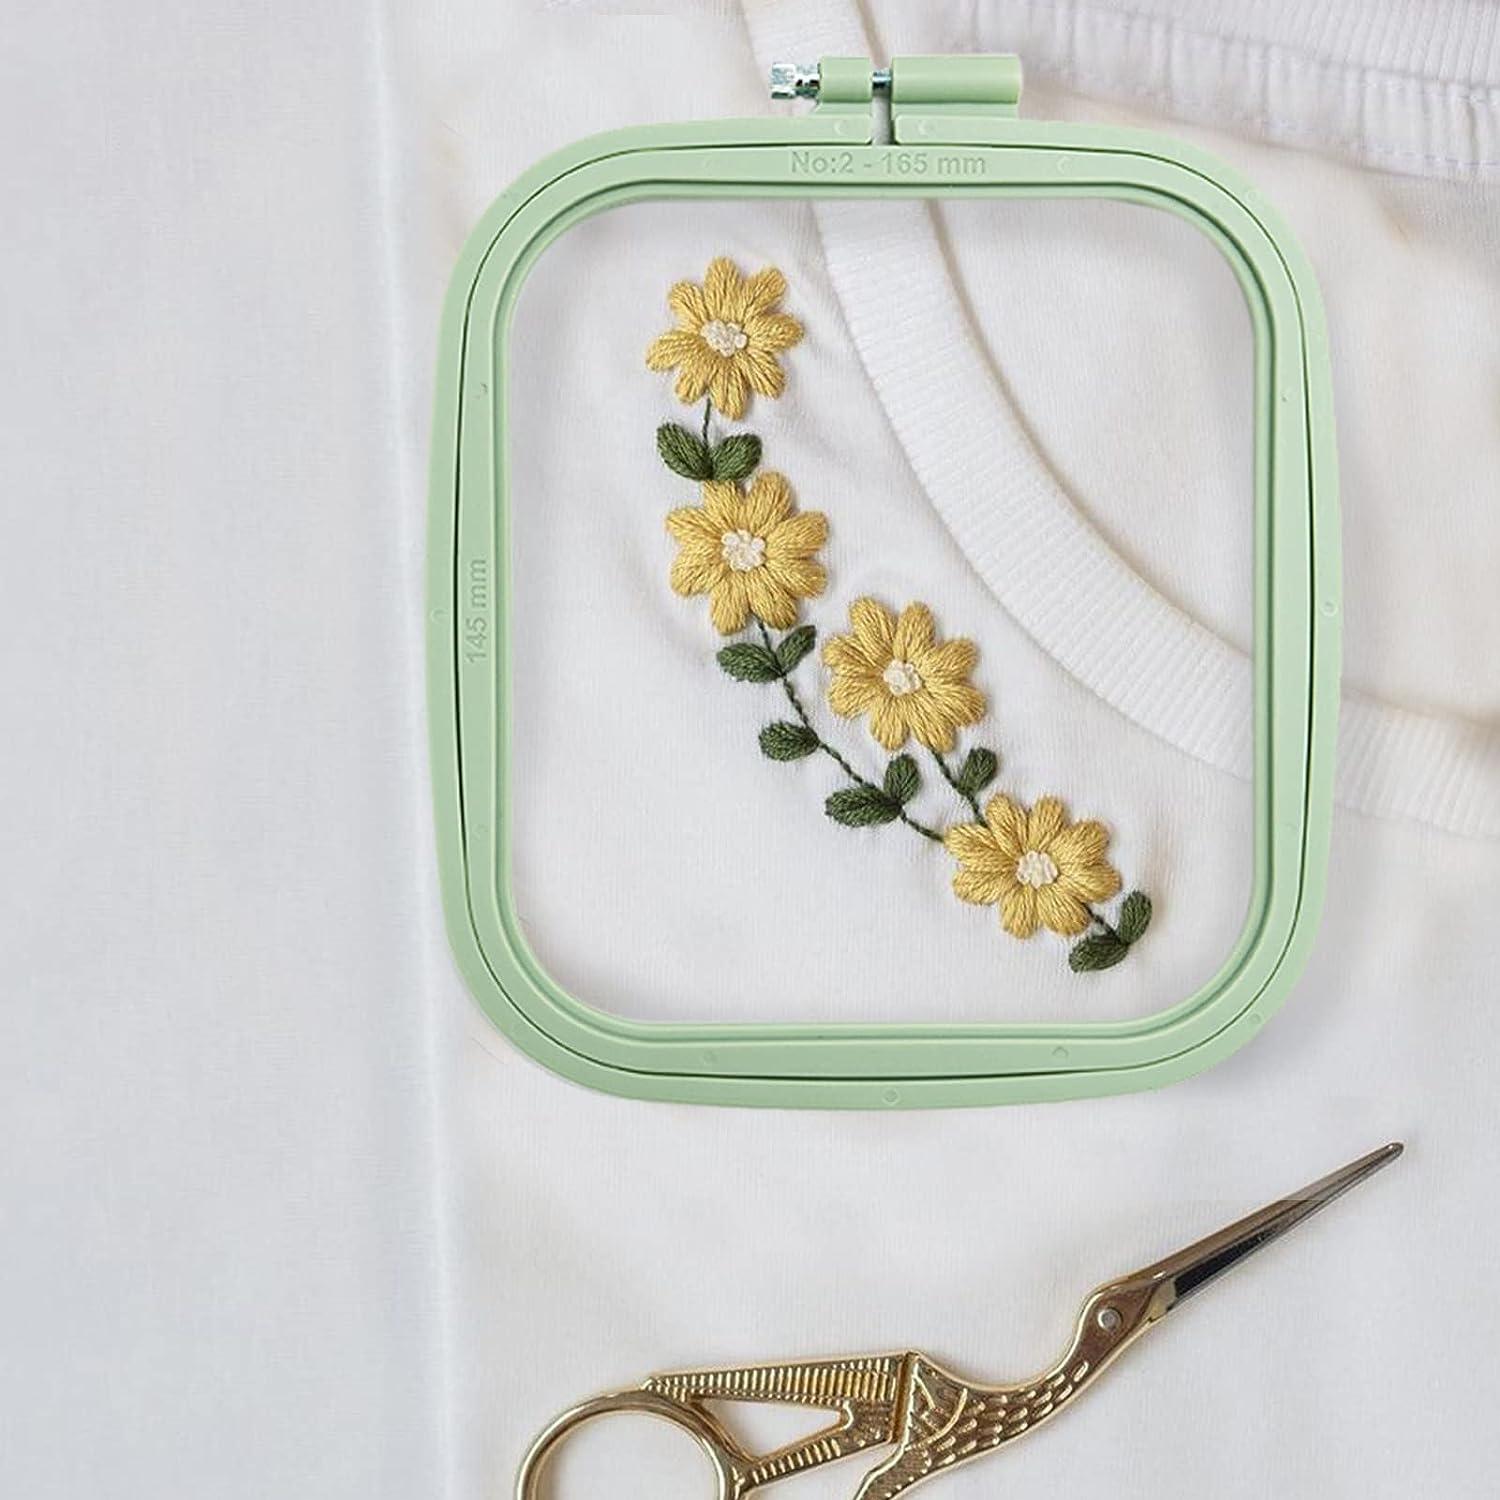 5 Pieces Embroidery Hoops Plastic Embroidery Circle Cross Stitch Hoop Ring,  Embroidery Hoops Set 3.7 inch to 9.5 inch for Embroidery and Cross Stitch